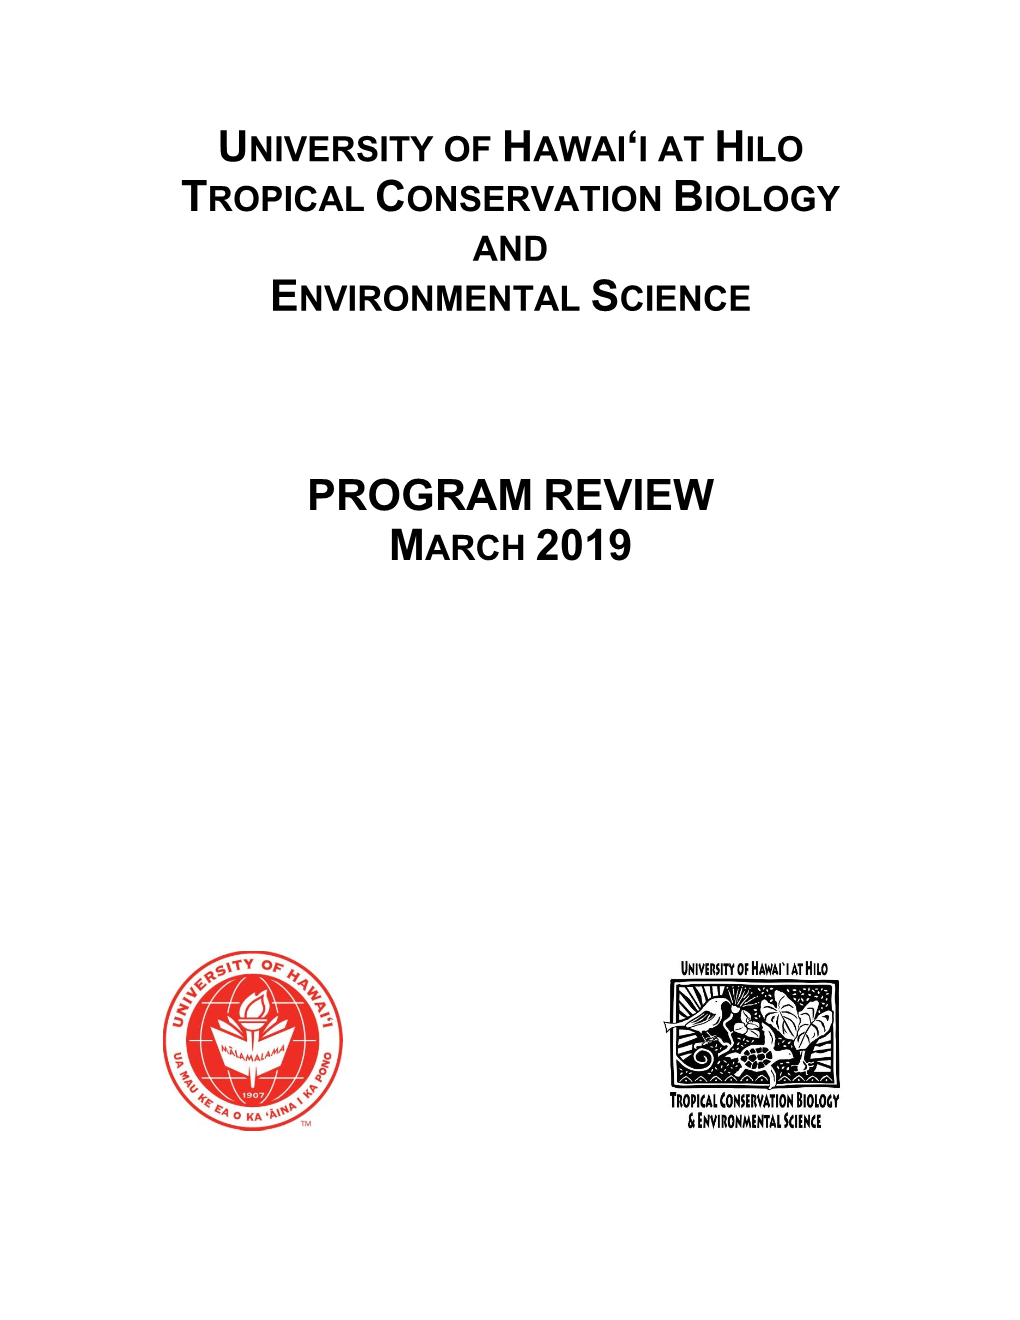 Environmental Science Program Review March 2019